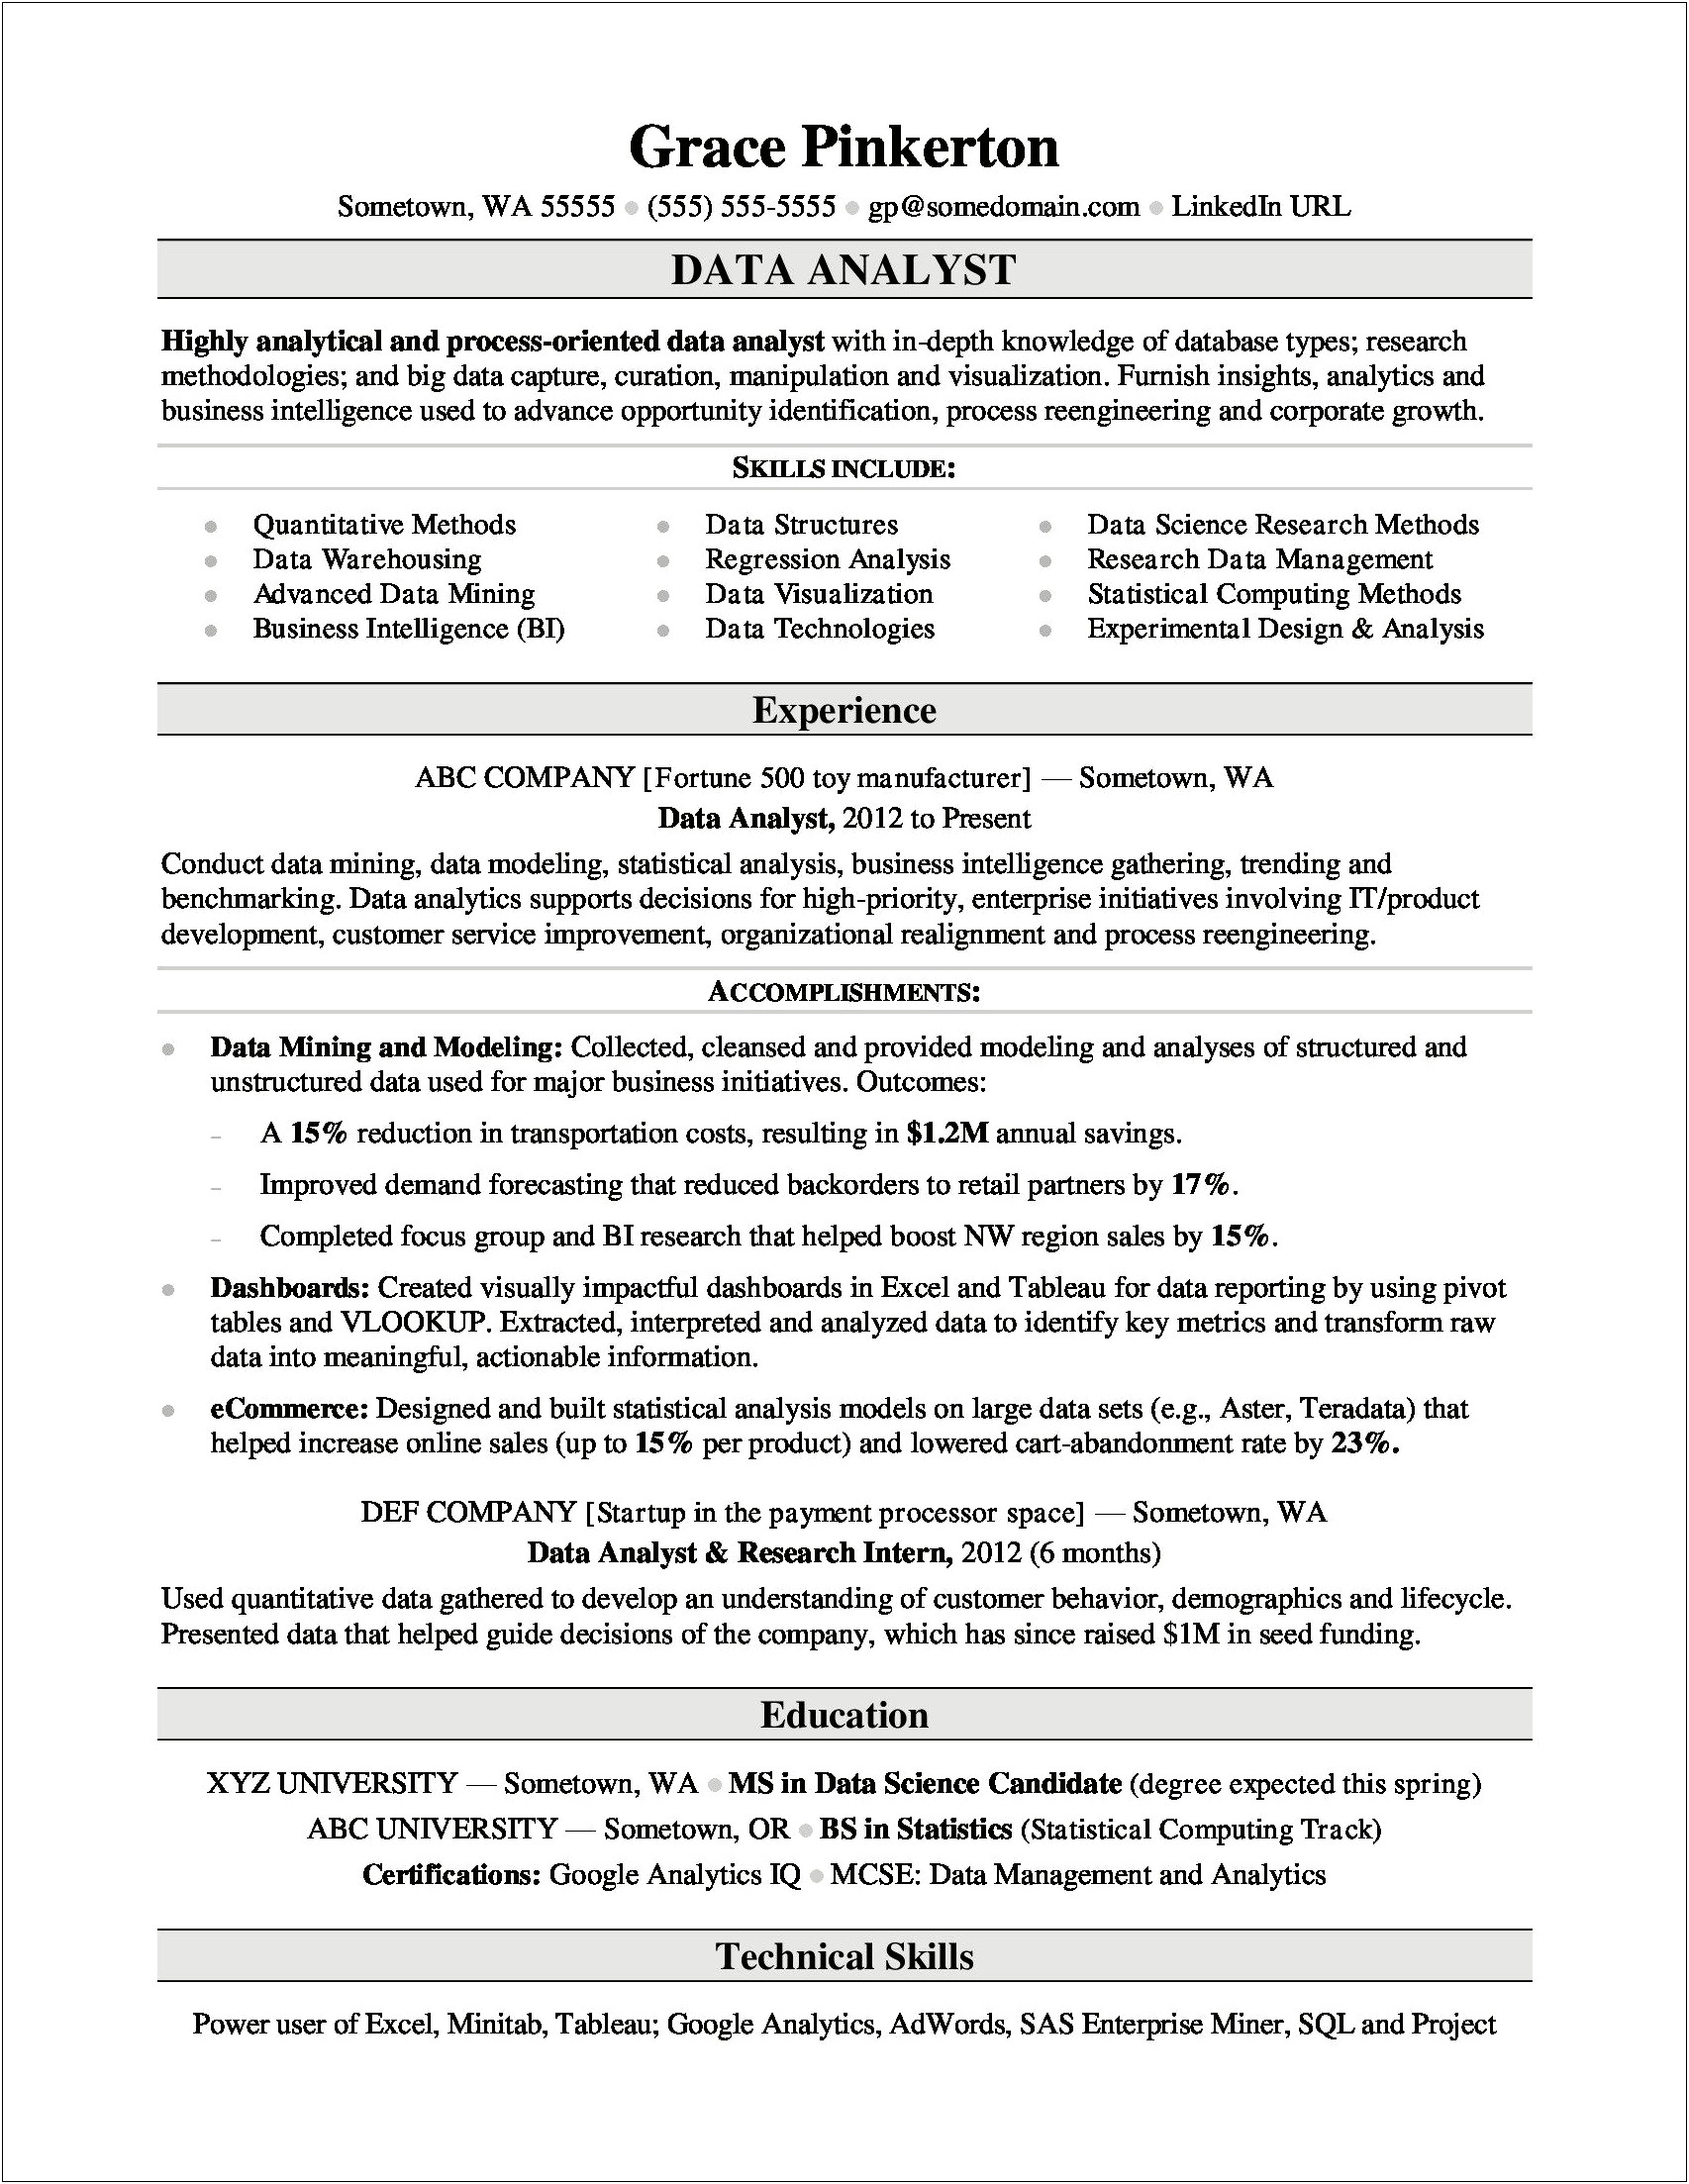 Business Process Management Business Analyst Resume